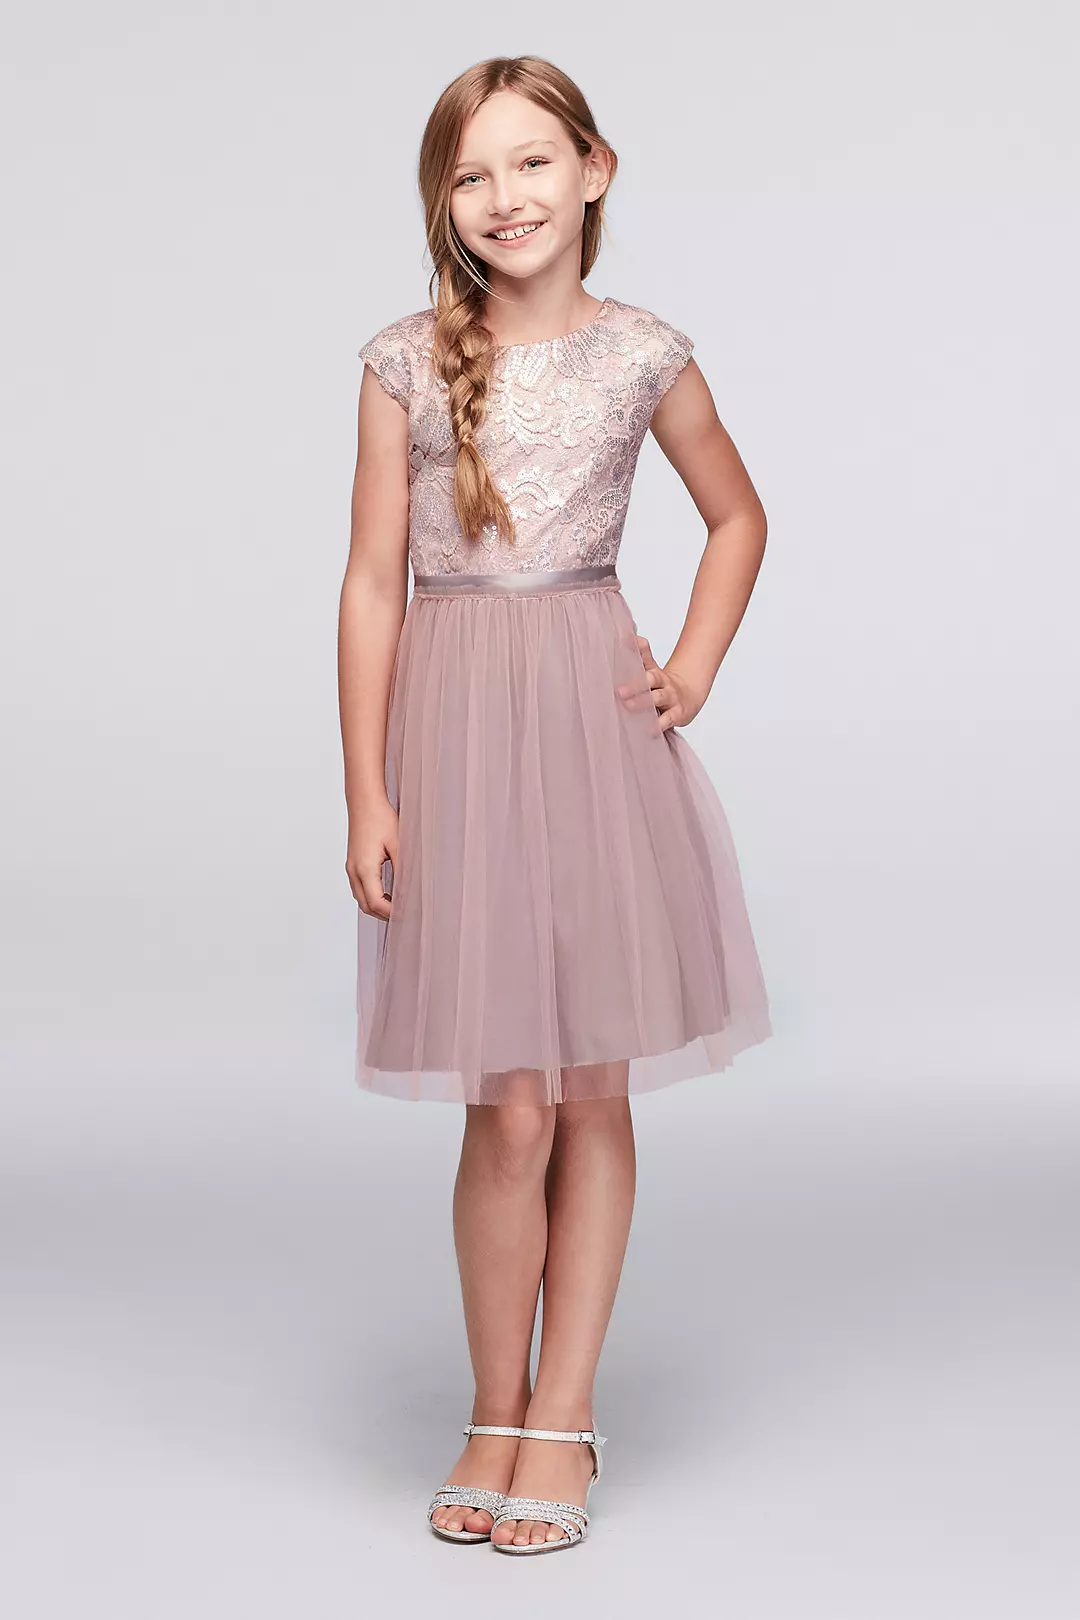 Sequined Lace Cap Sleeve Dress with Tulle Skirt Image